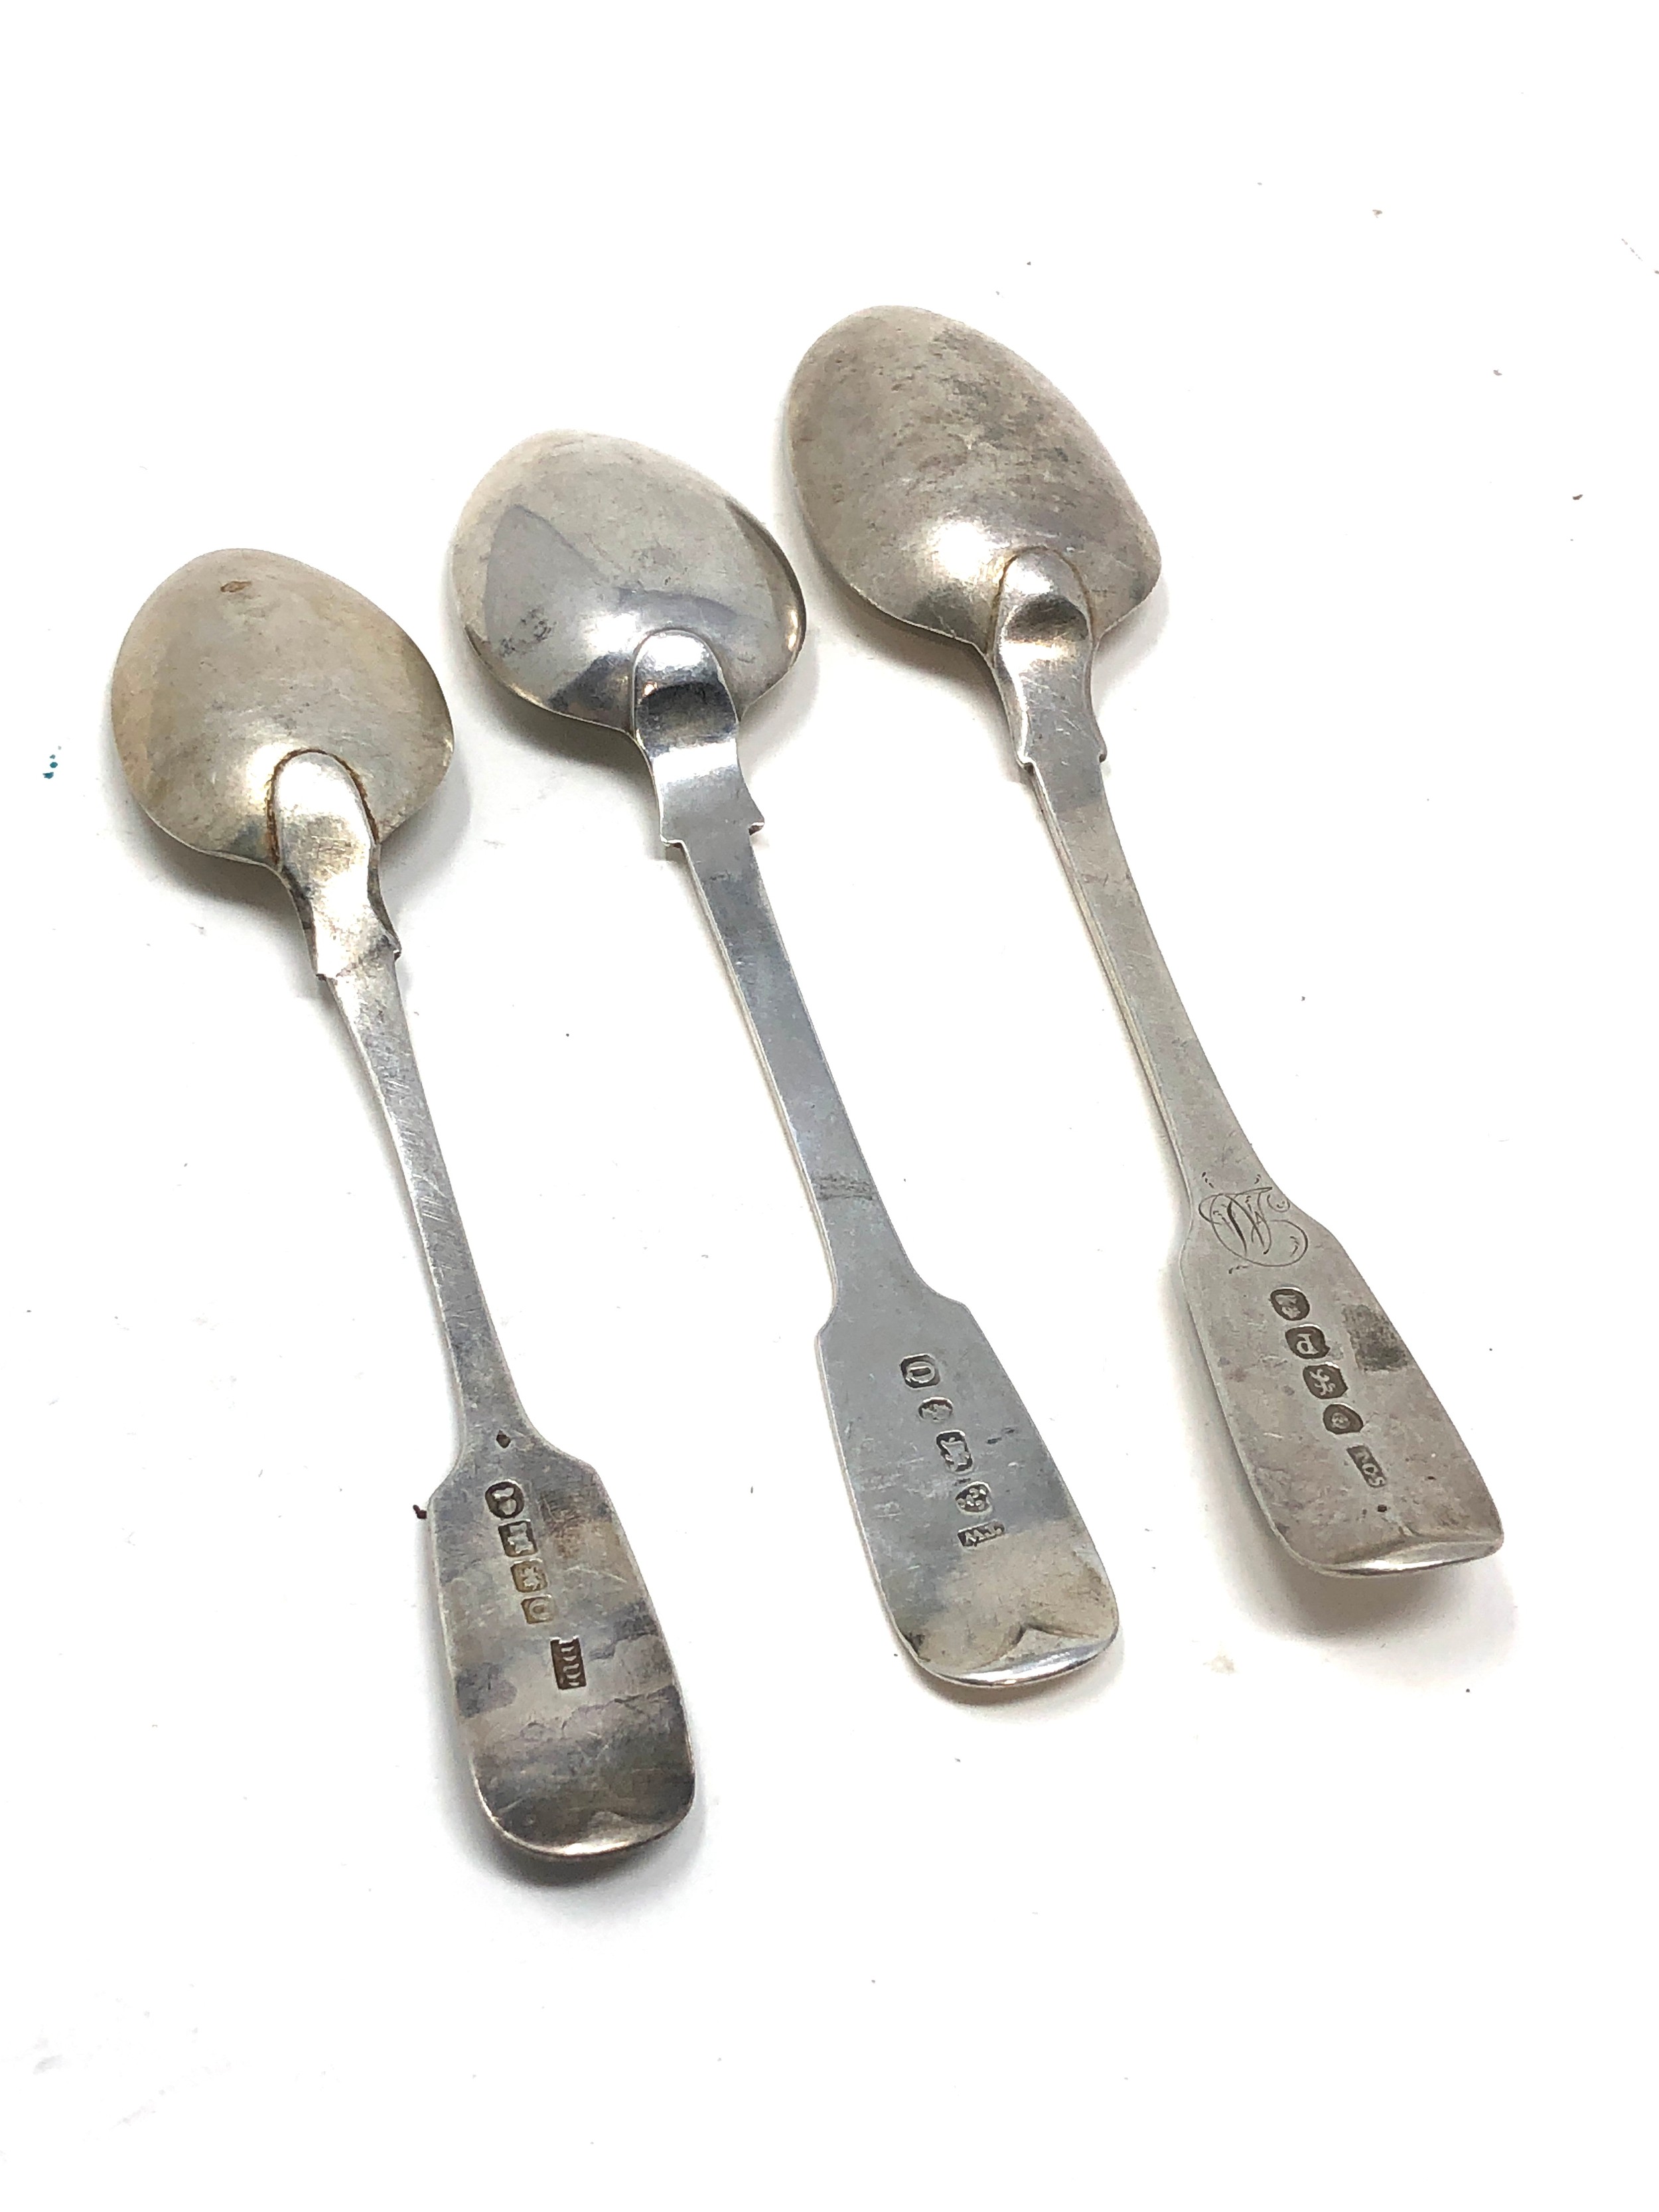 3 antique silver tea spoons weight 54g - Image 2 of 3